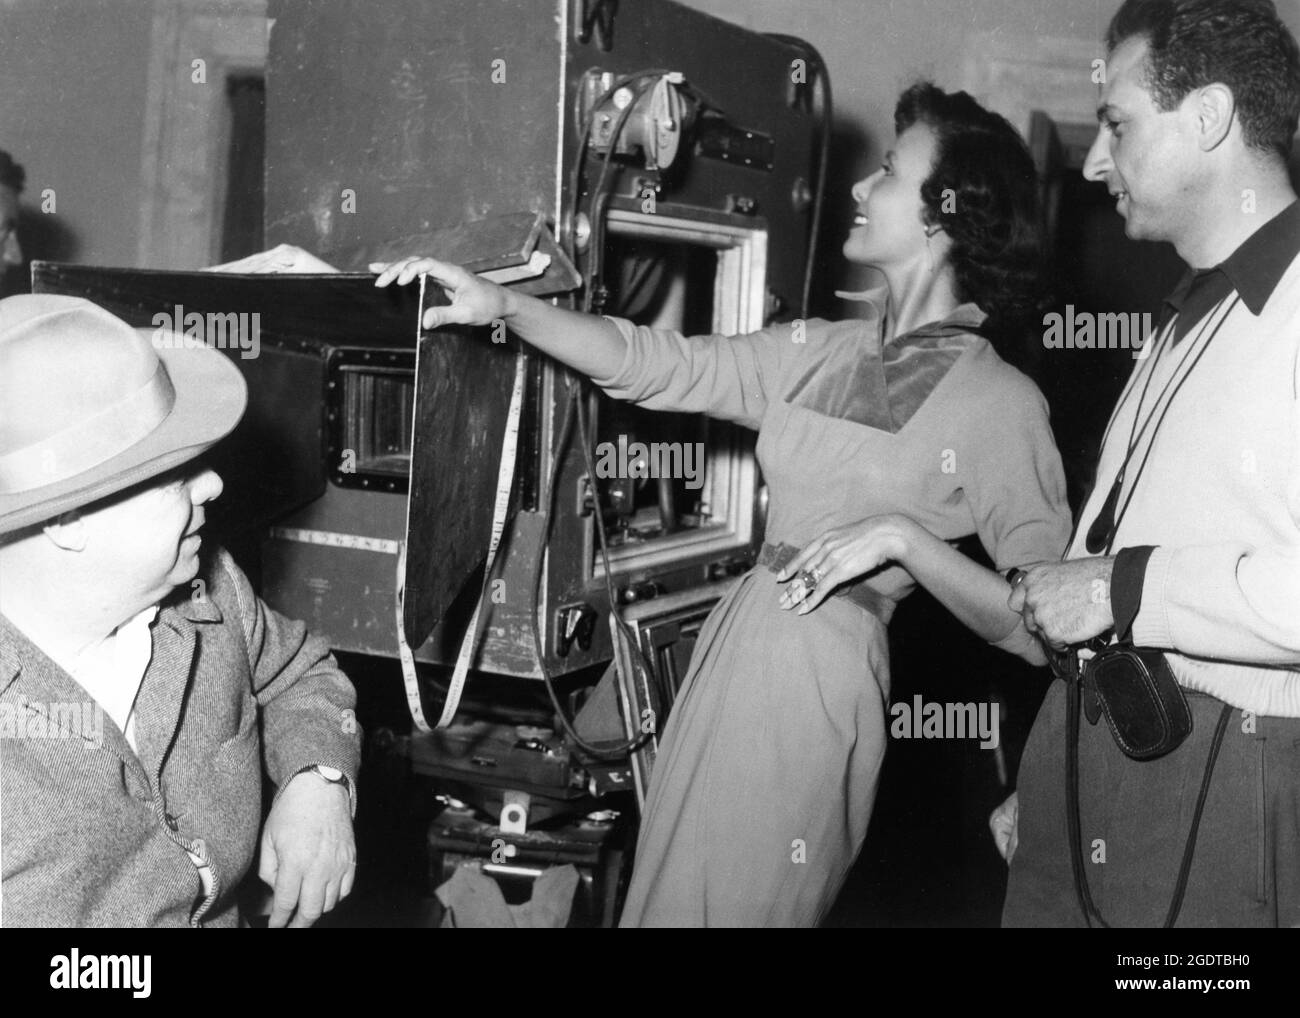 Director JEAN RENOIR Set Visitor LENA HORNE and Cinematographer (and nephew) CLAUDE RENOIR on set candid at Cinecitta Studios in Rome during filming of THE GOLDEN COACH / LE CARROSSE D'OR / LA CORROZZA D'ORO 1952 France - Italy co-production Delphinus / Hoche Productions / Panaria Film Stock Photo